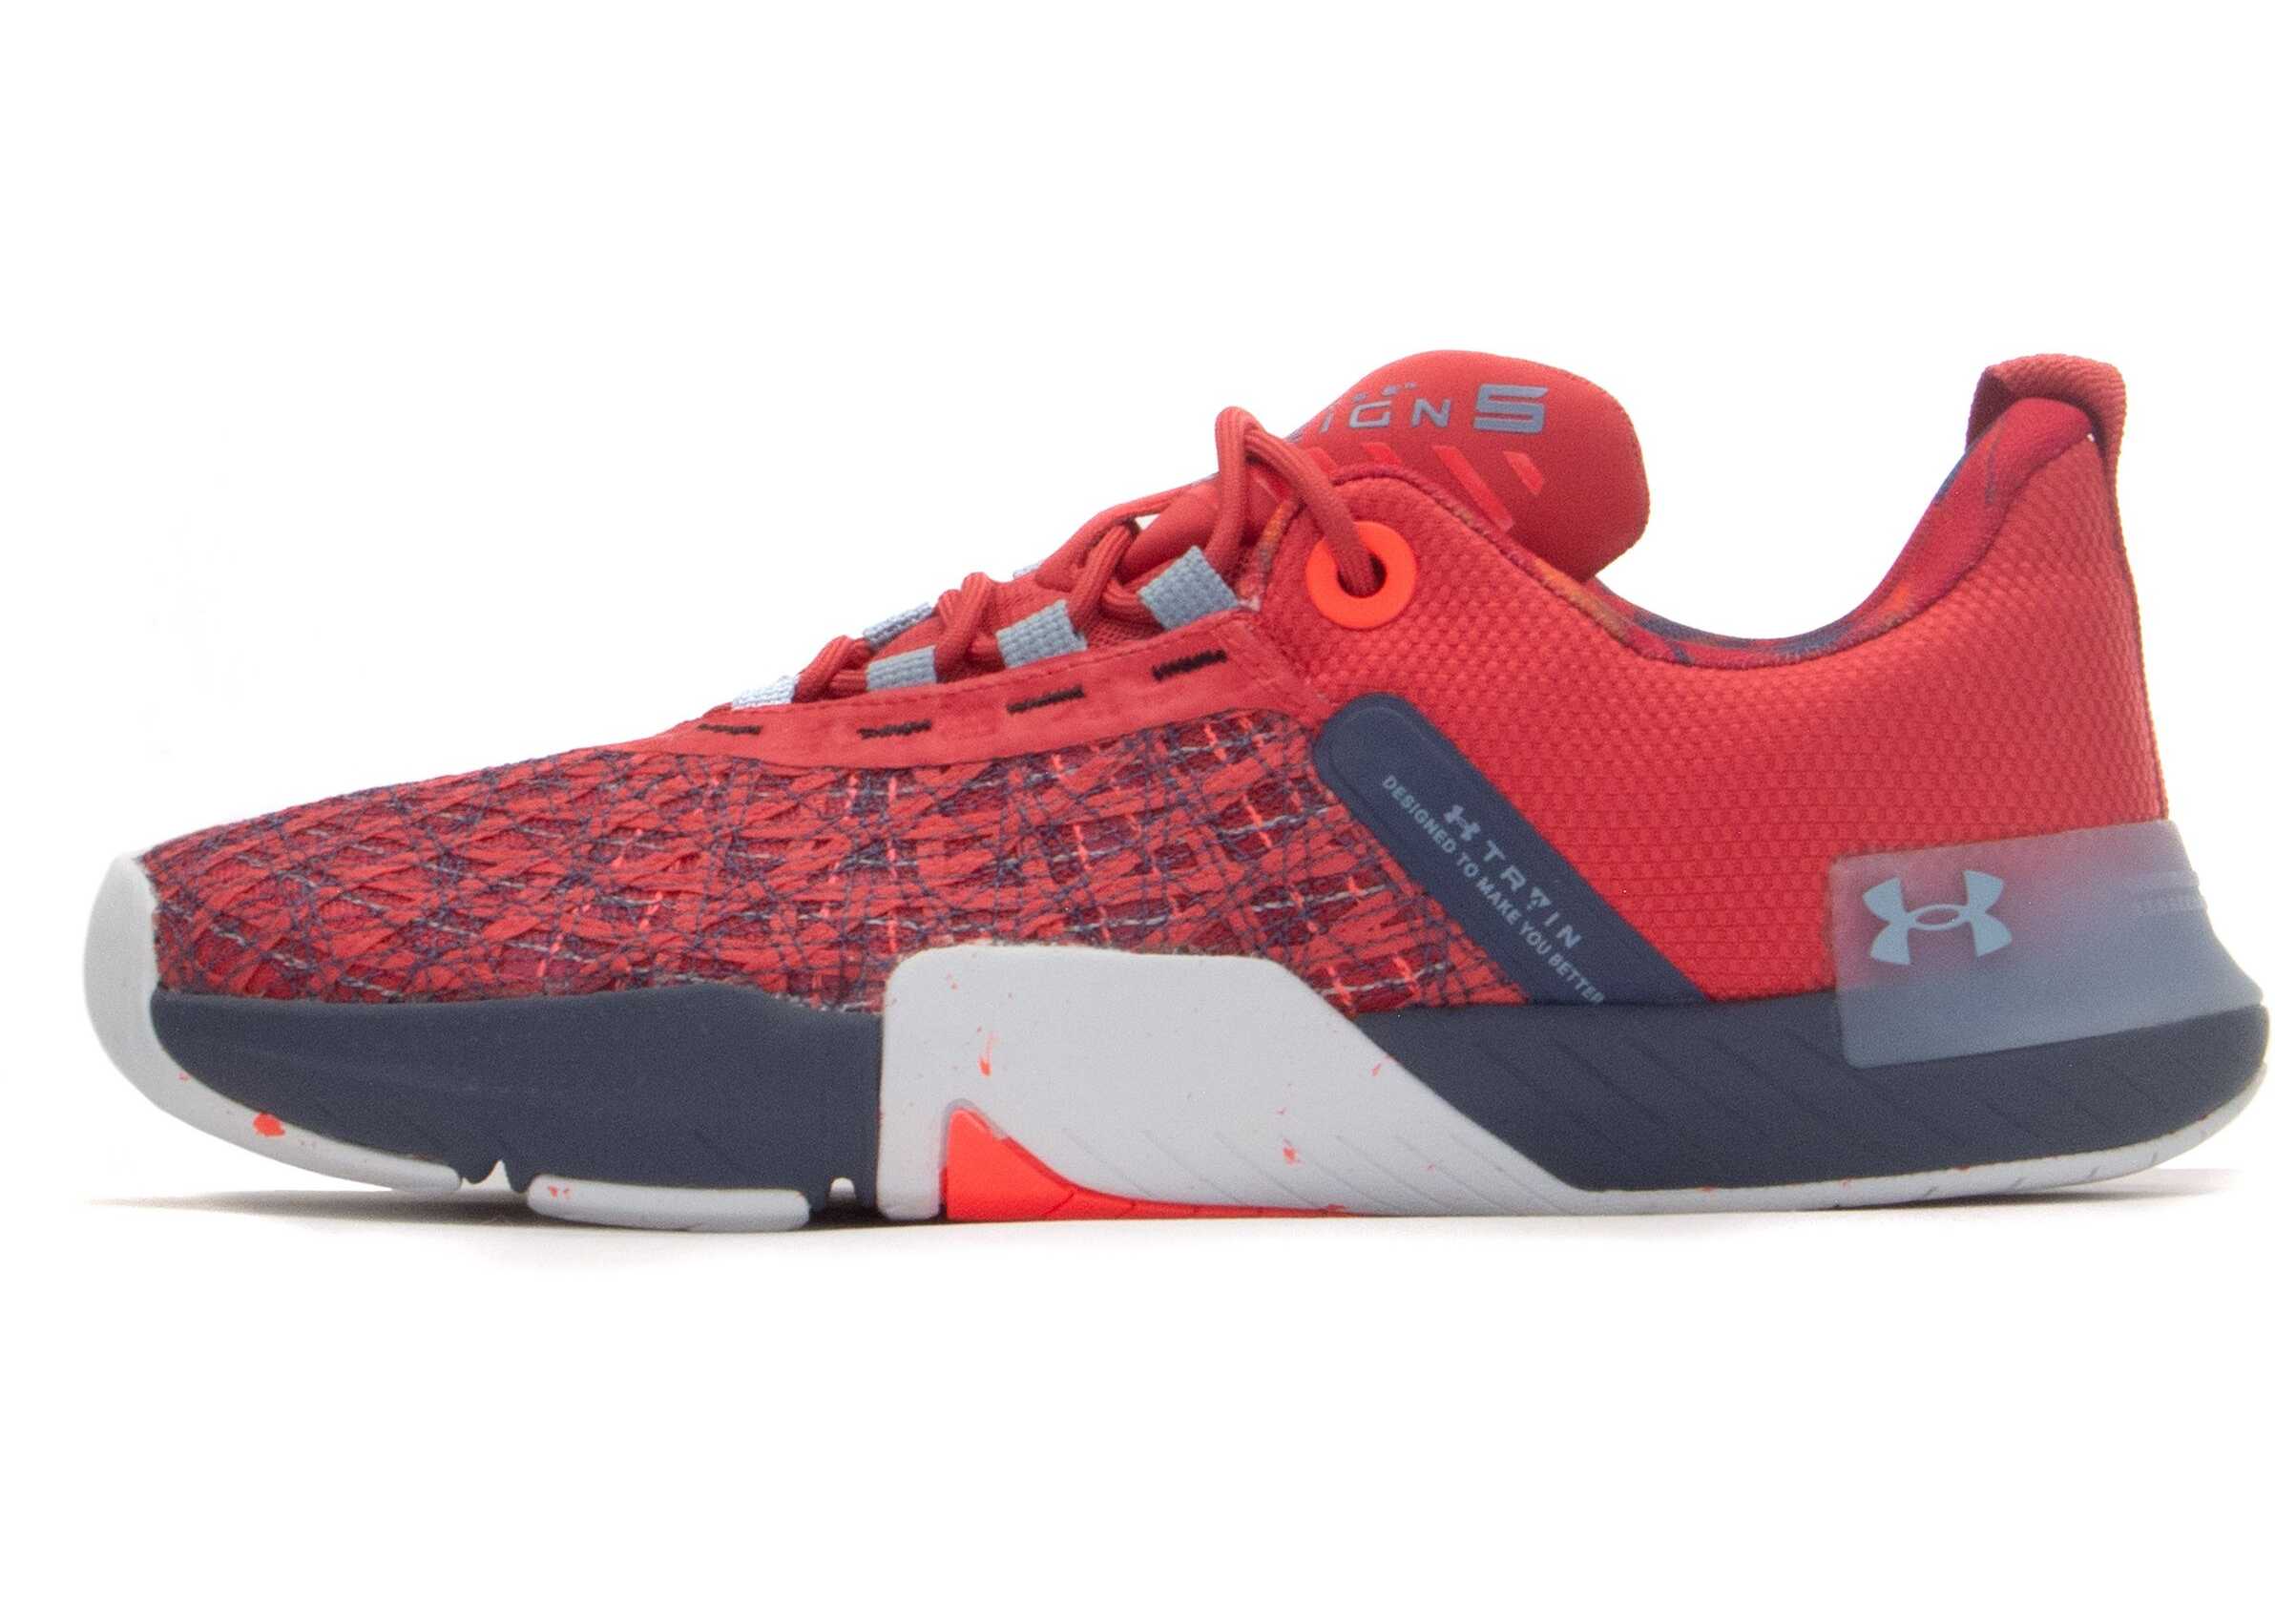 Under Armour Ua Tribase Reign 5 Q1 Red